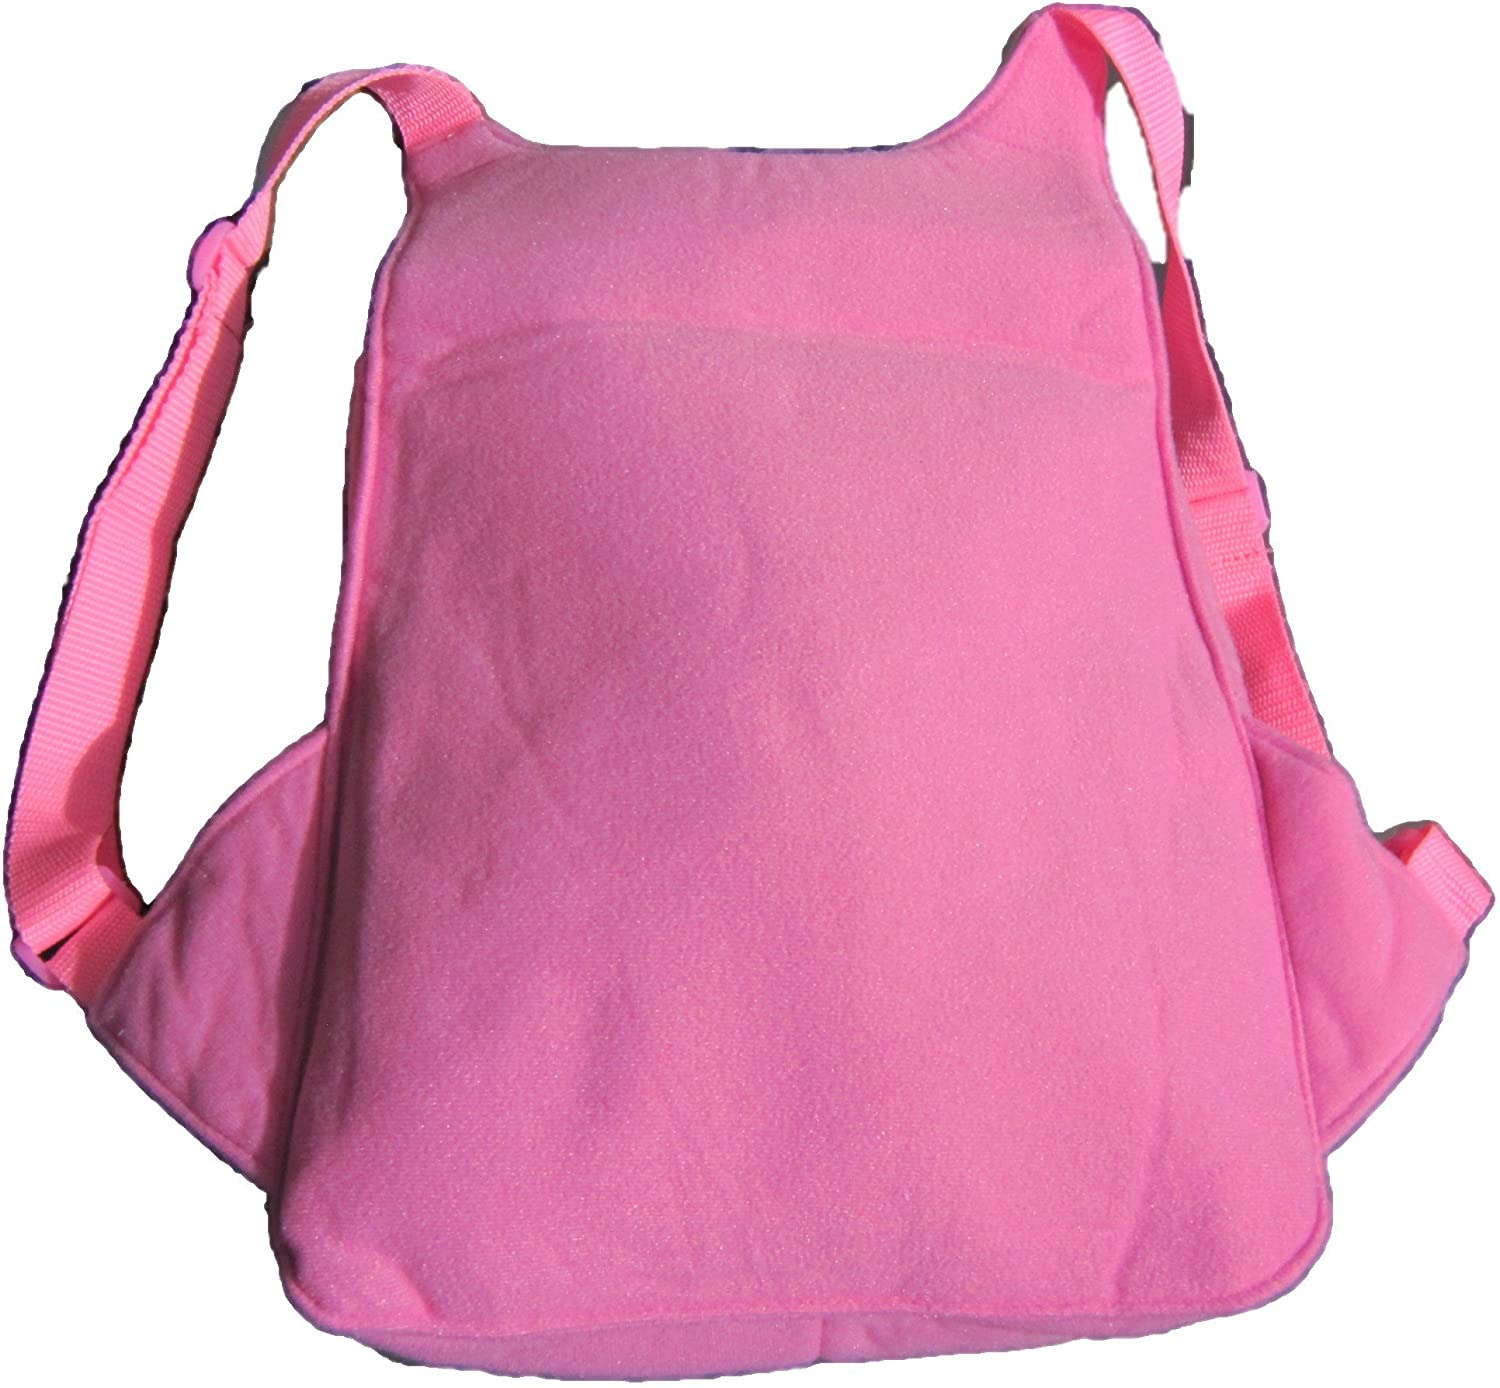 MLP Pinkie Pie Soft Plush Toy Backpack 3